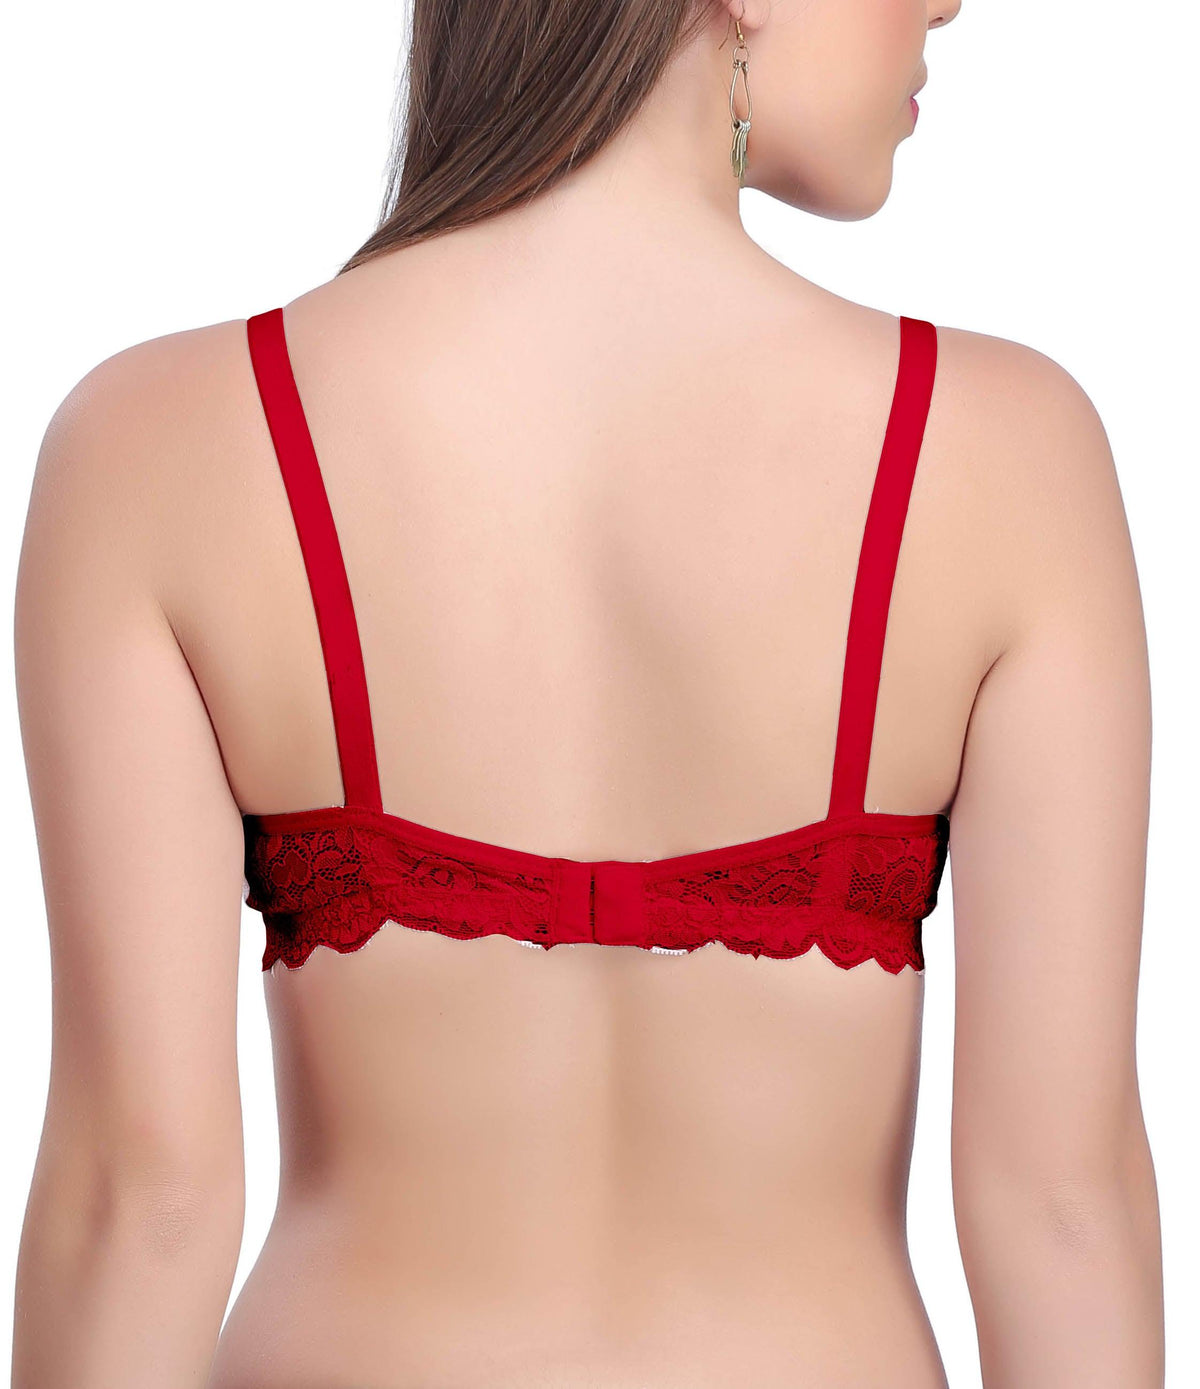 Eve's Beauty: Seamless Padded Bras for Effortless Comfort and